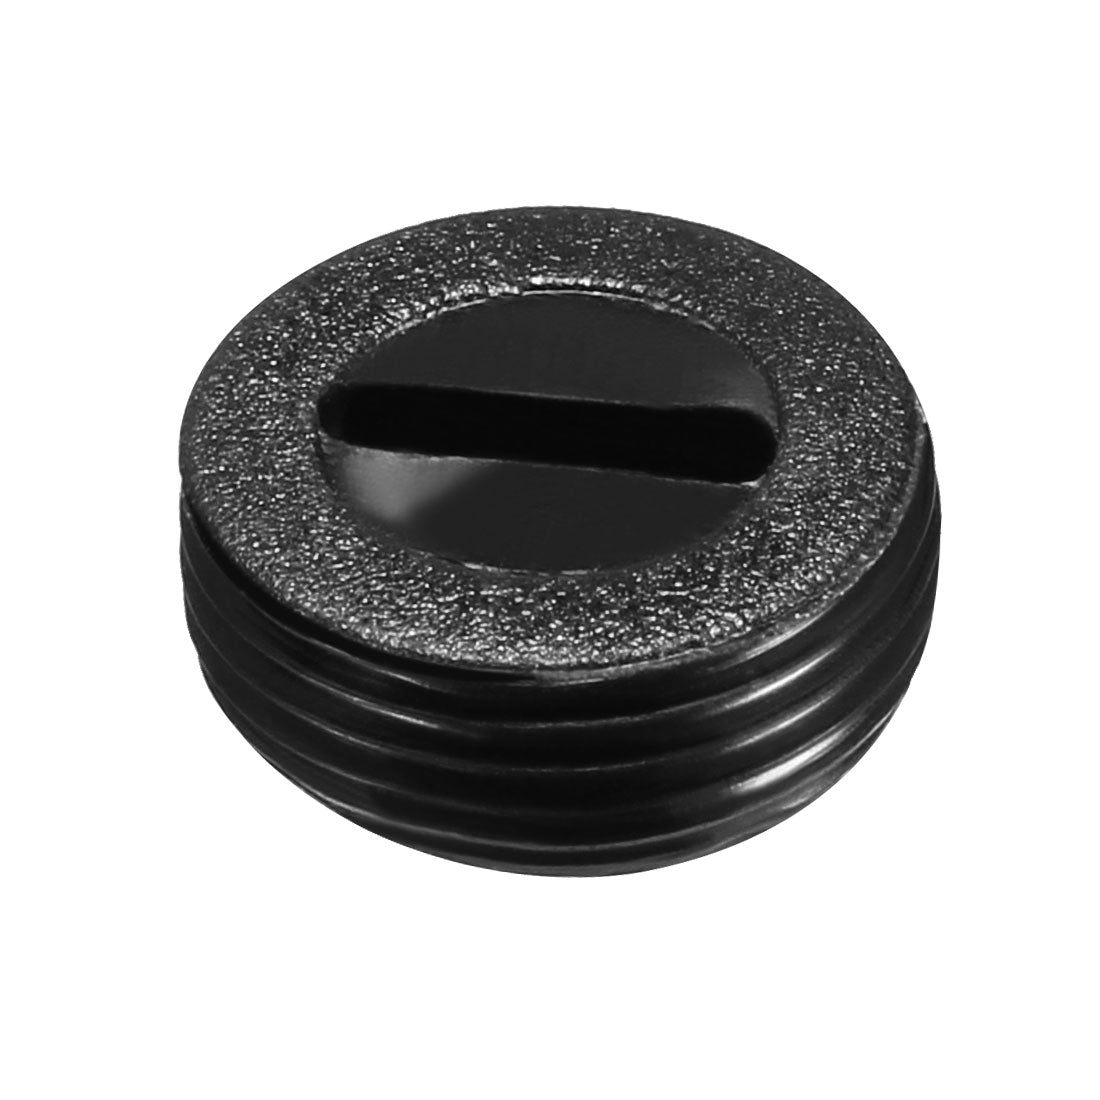 uxcell Uxcell Carbon Brush Holder Caps 13mm O.D. 7.5mm I.D. 5.2mm Thickness Motor Brush Cover Plastic Fitting Thread Black 10pcs